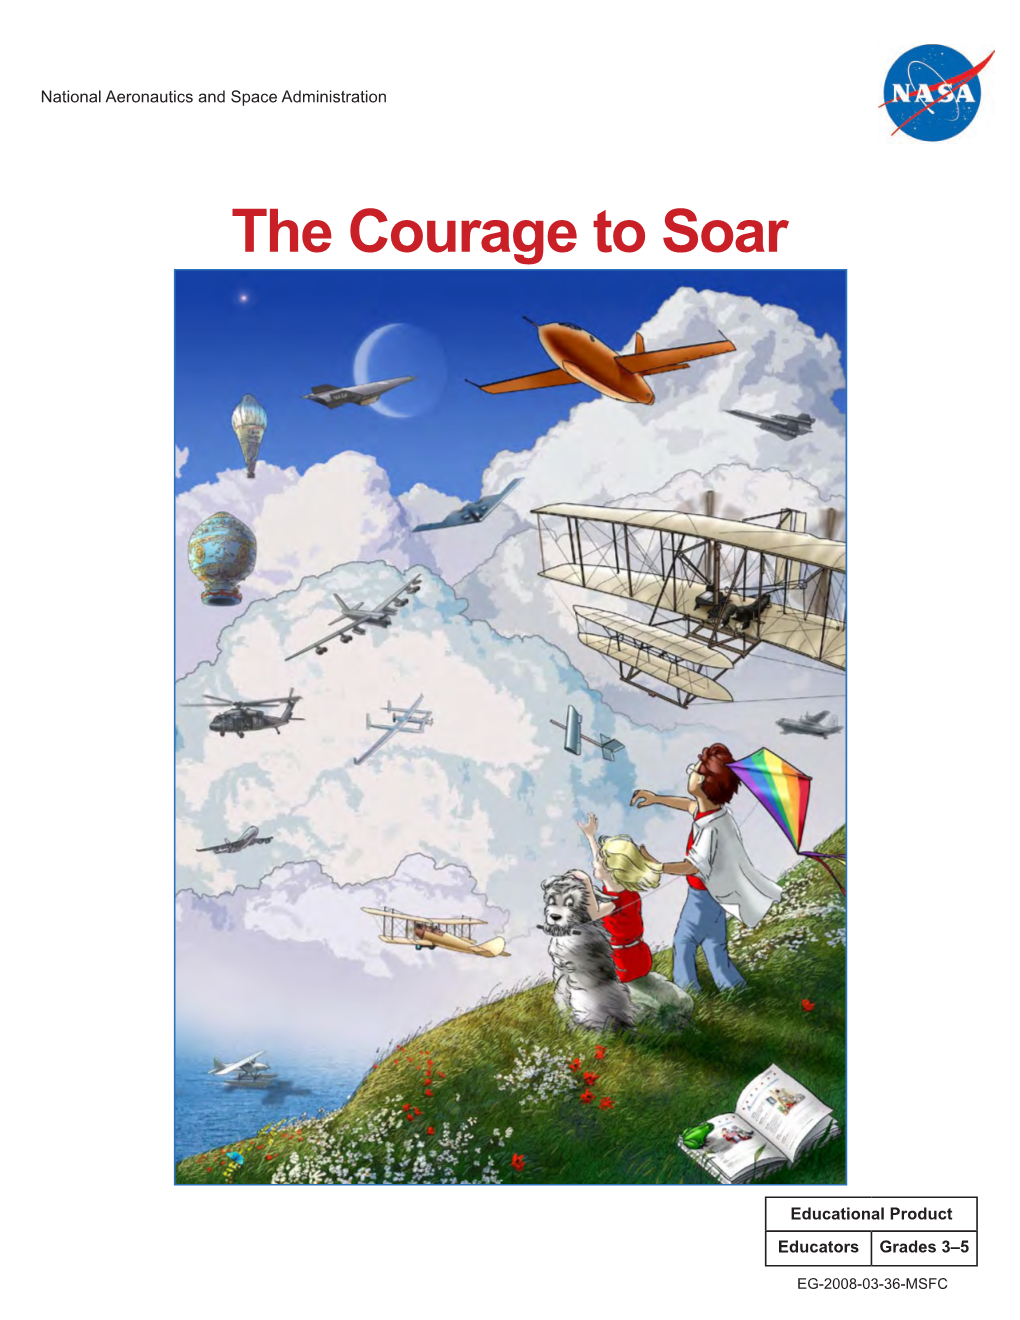 The Courage to Soar